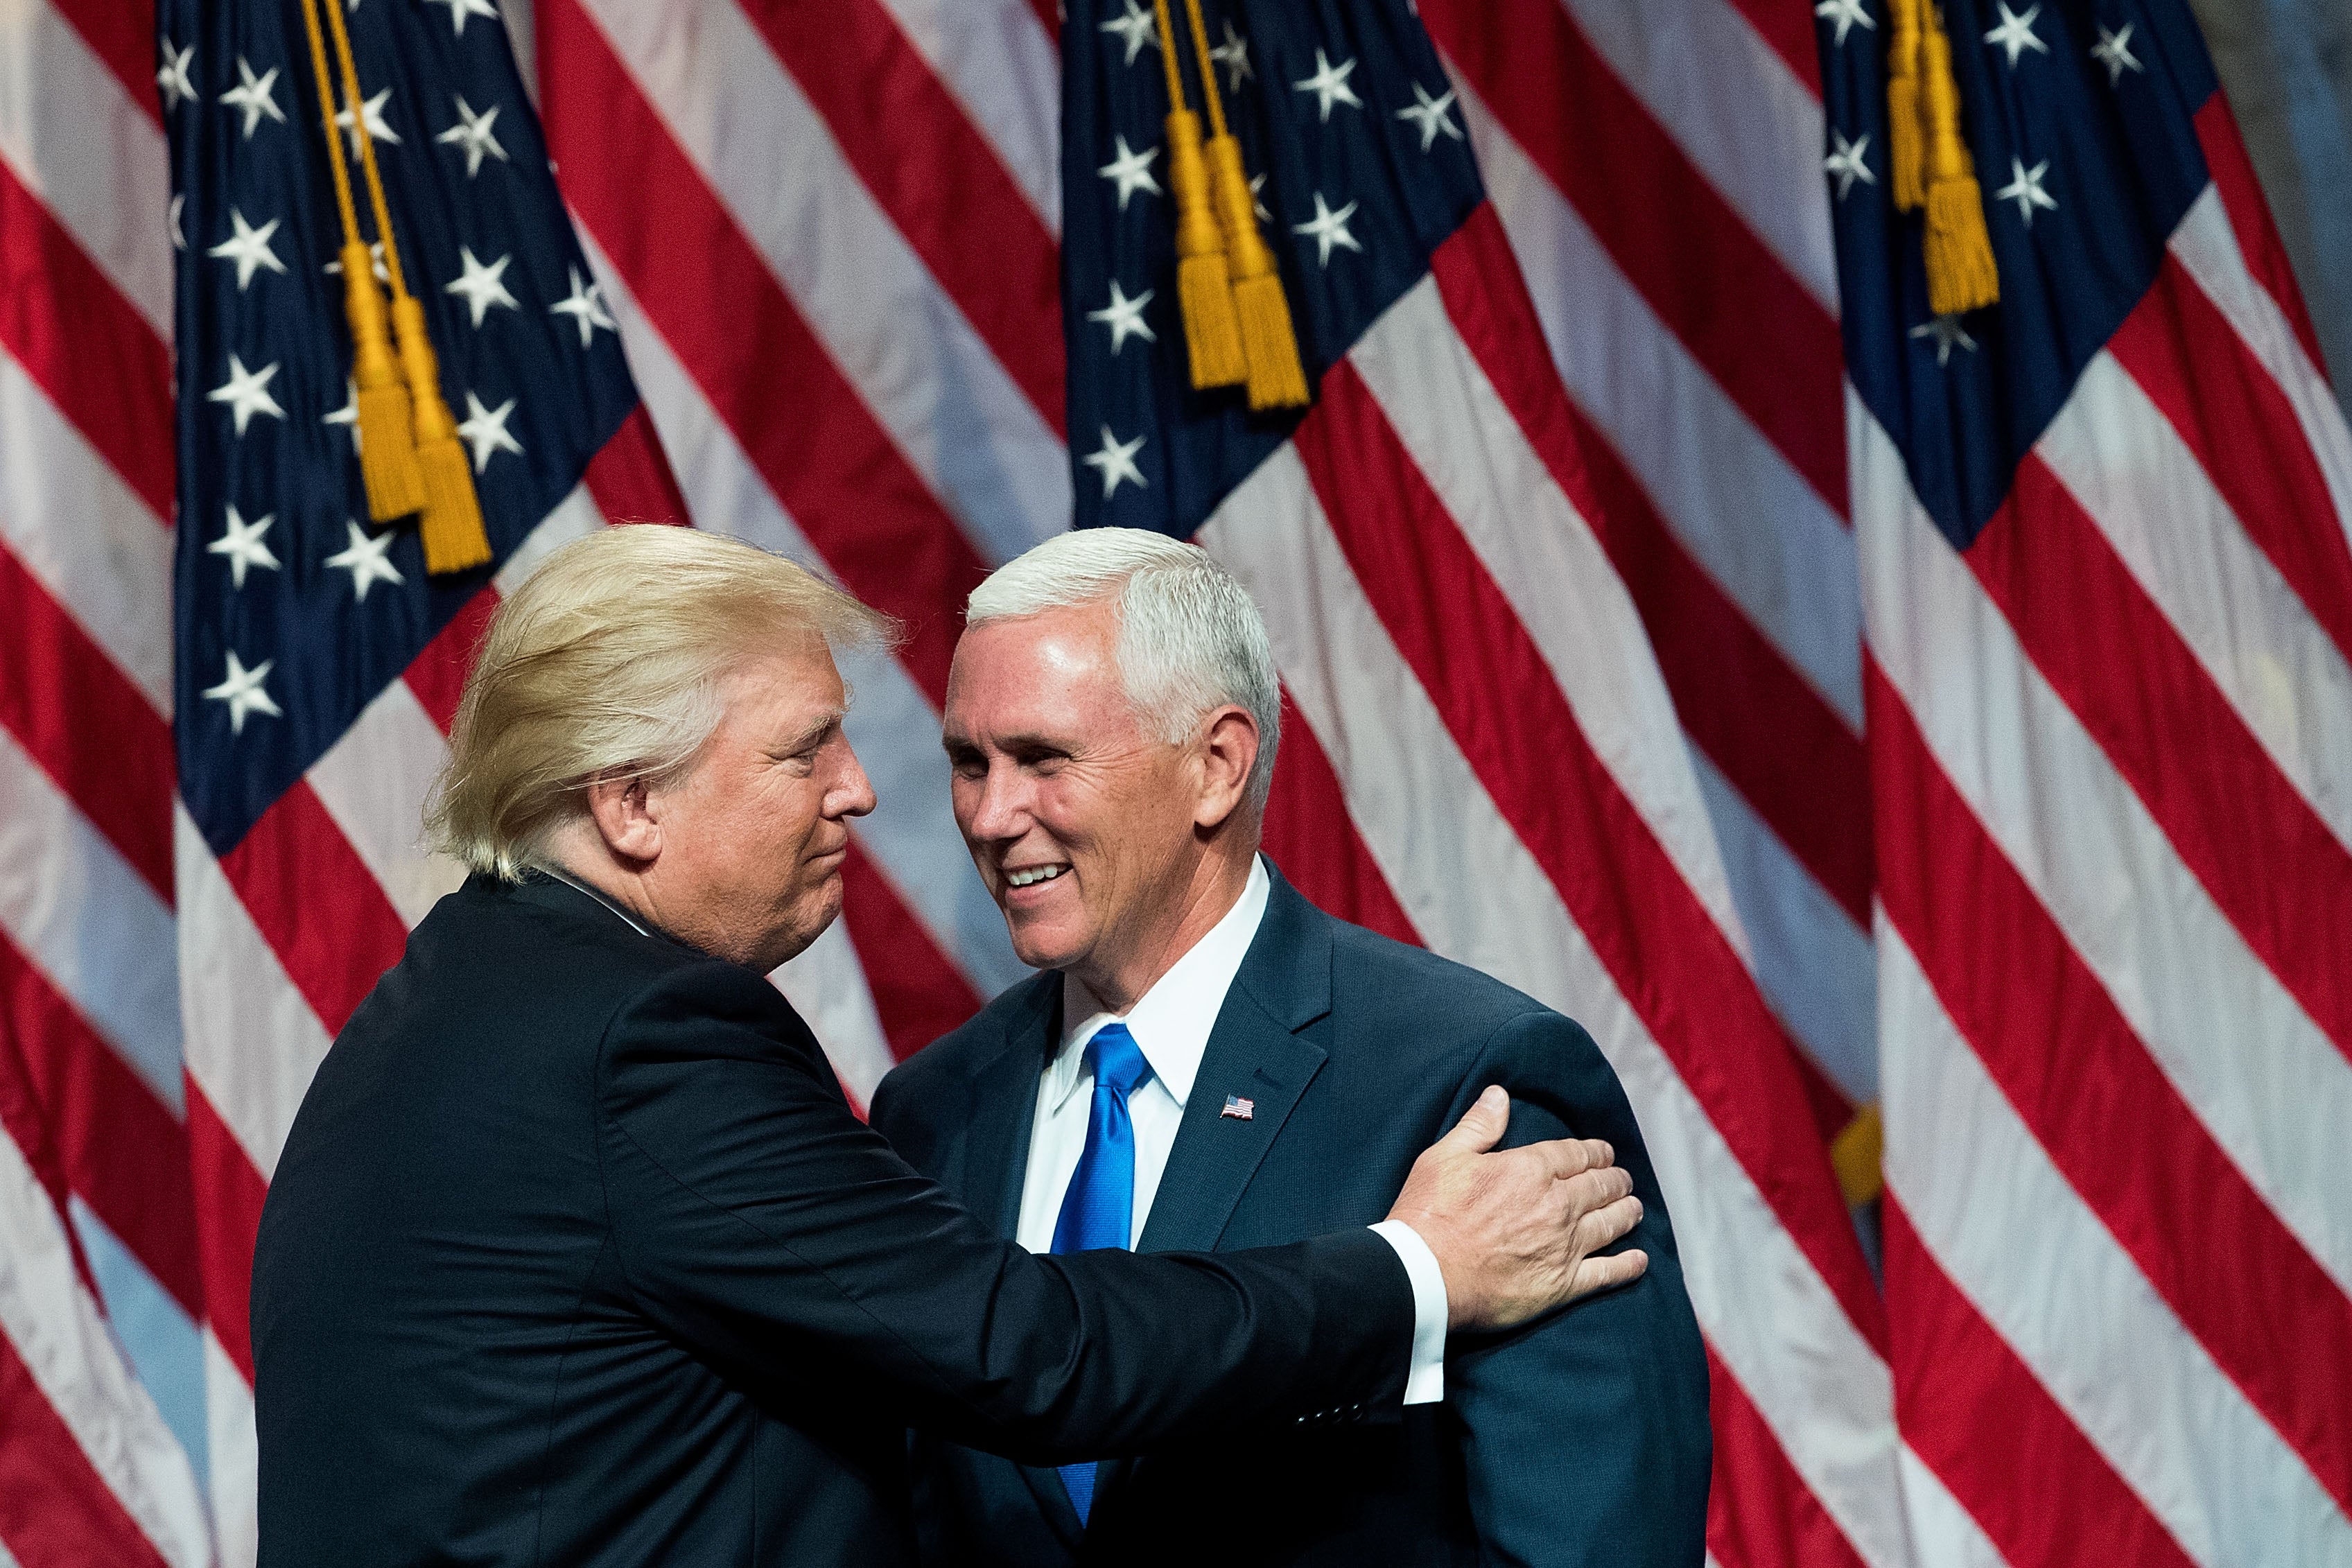 Republican presidential candidate Donald Trump introduces his newly selected vice-presidential running mate Mike Pence, governor of Indiana, on 16 July 2016